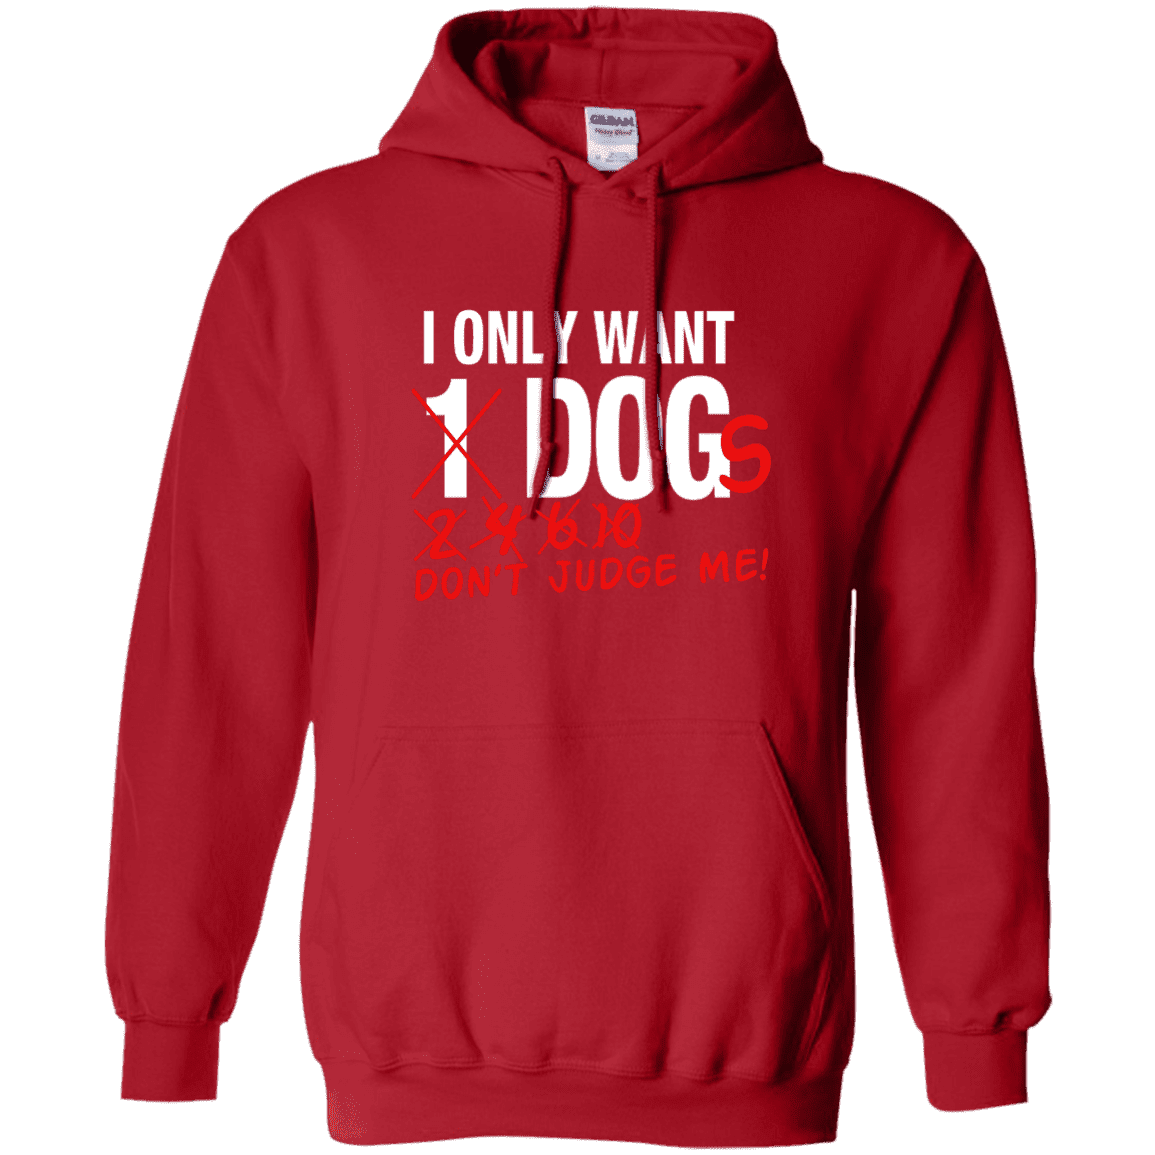 I Only Want 1 Dog - Hoodie.